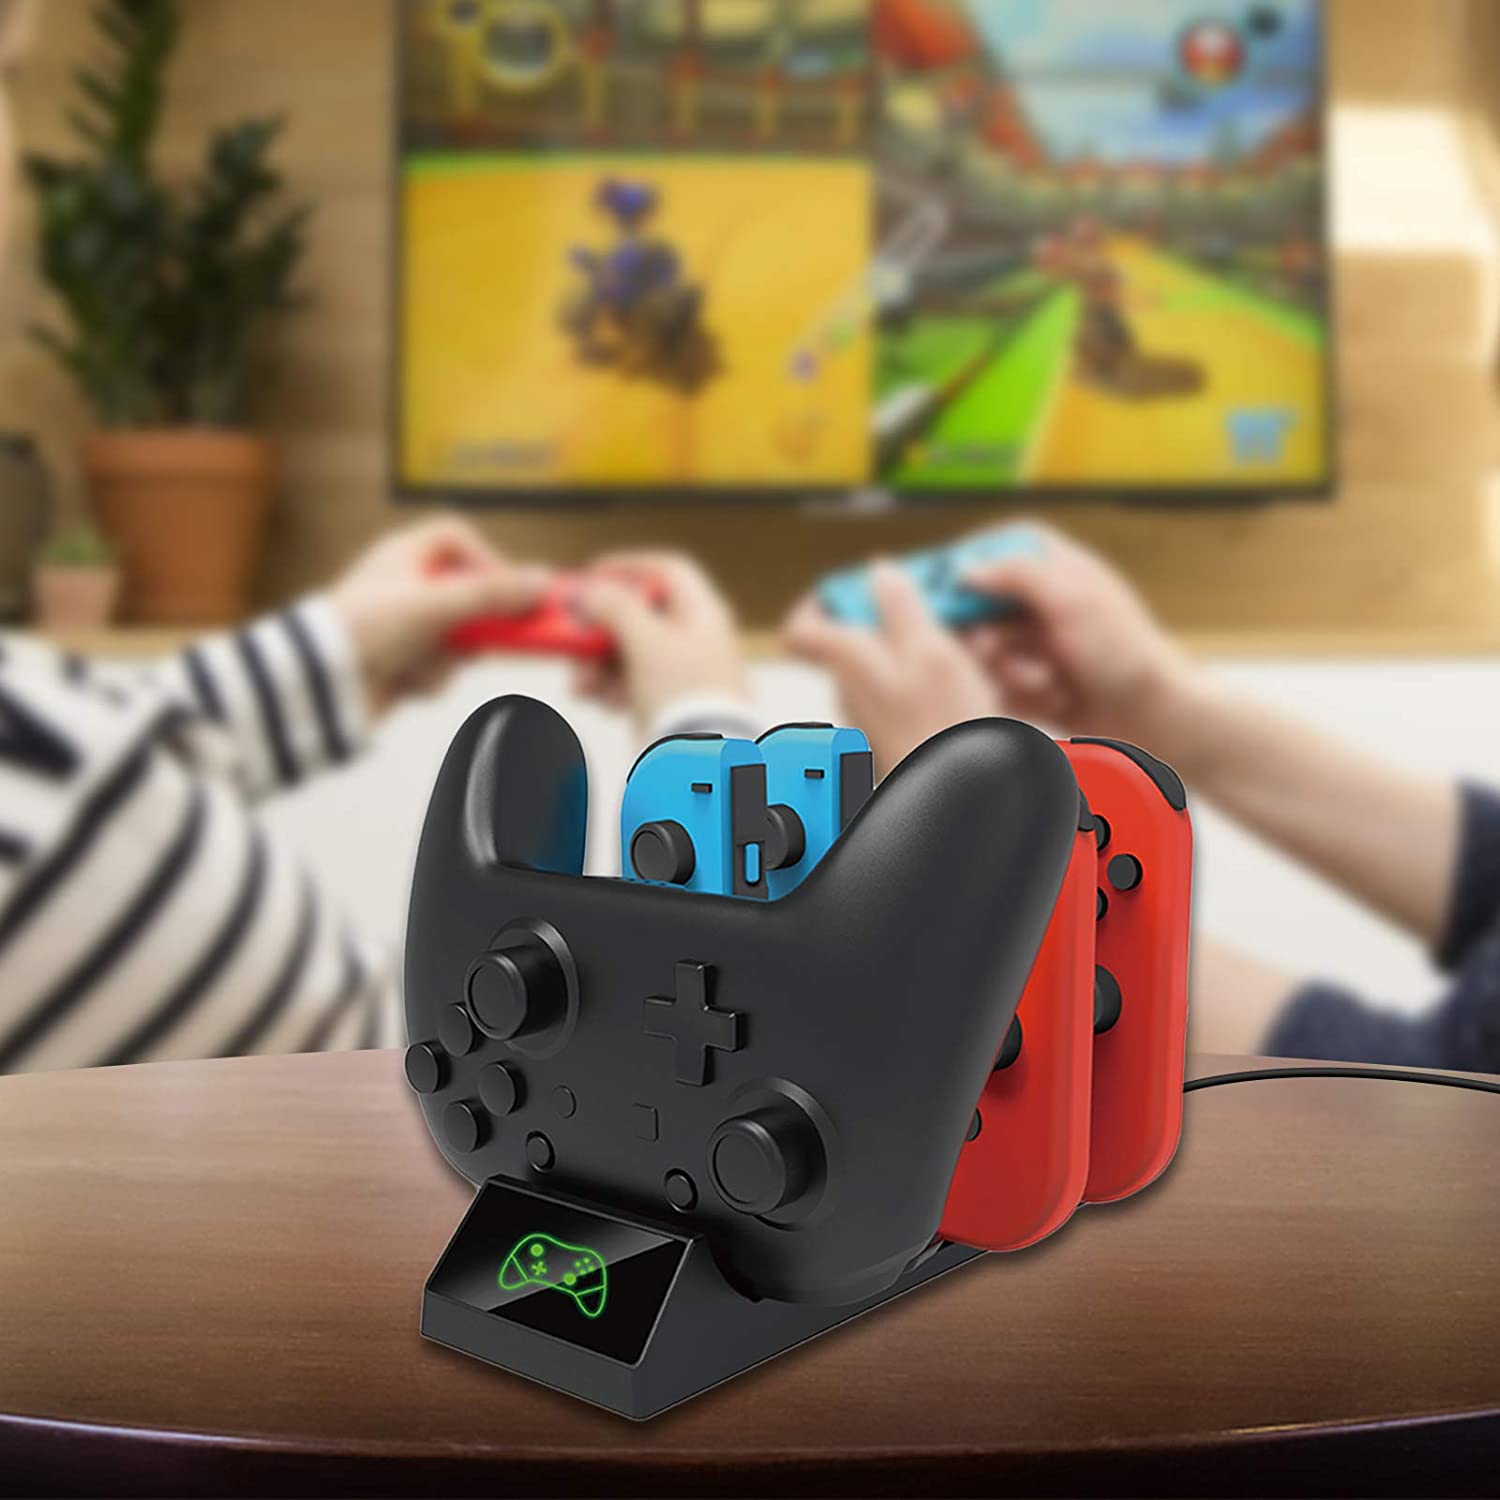 The dock is placed on the table and is charging one controller and two pairs of Joycons.